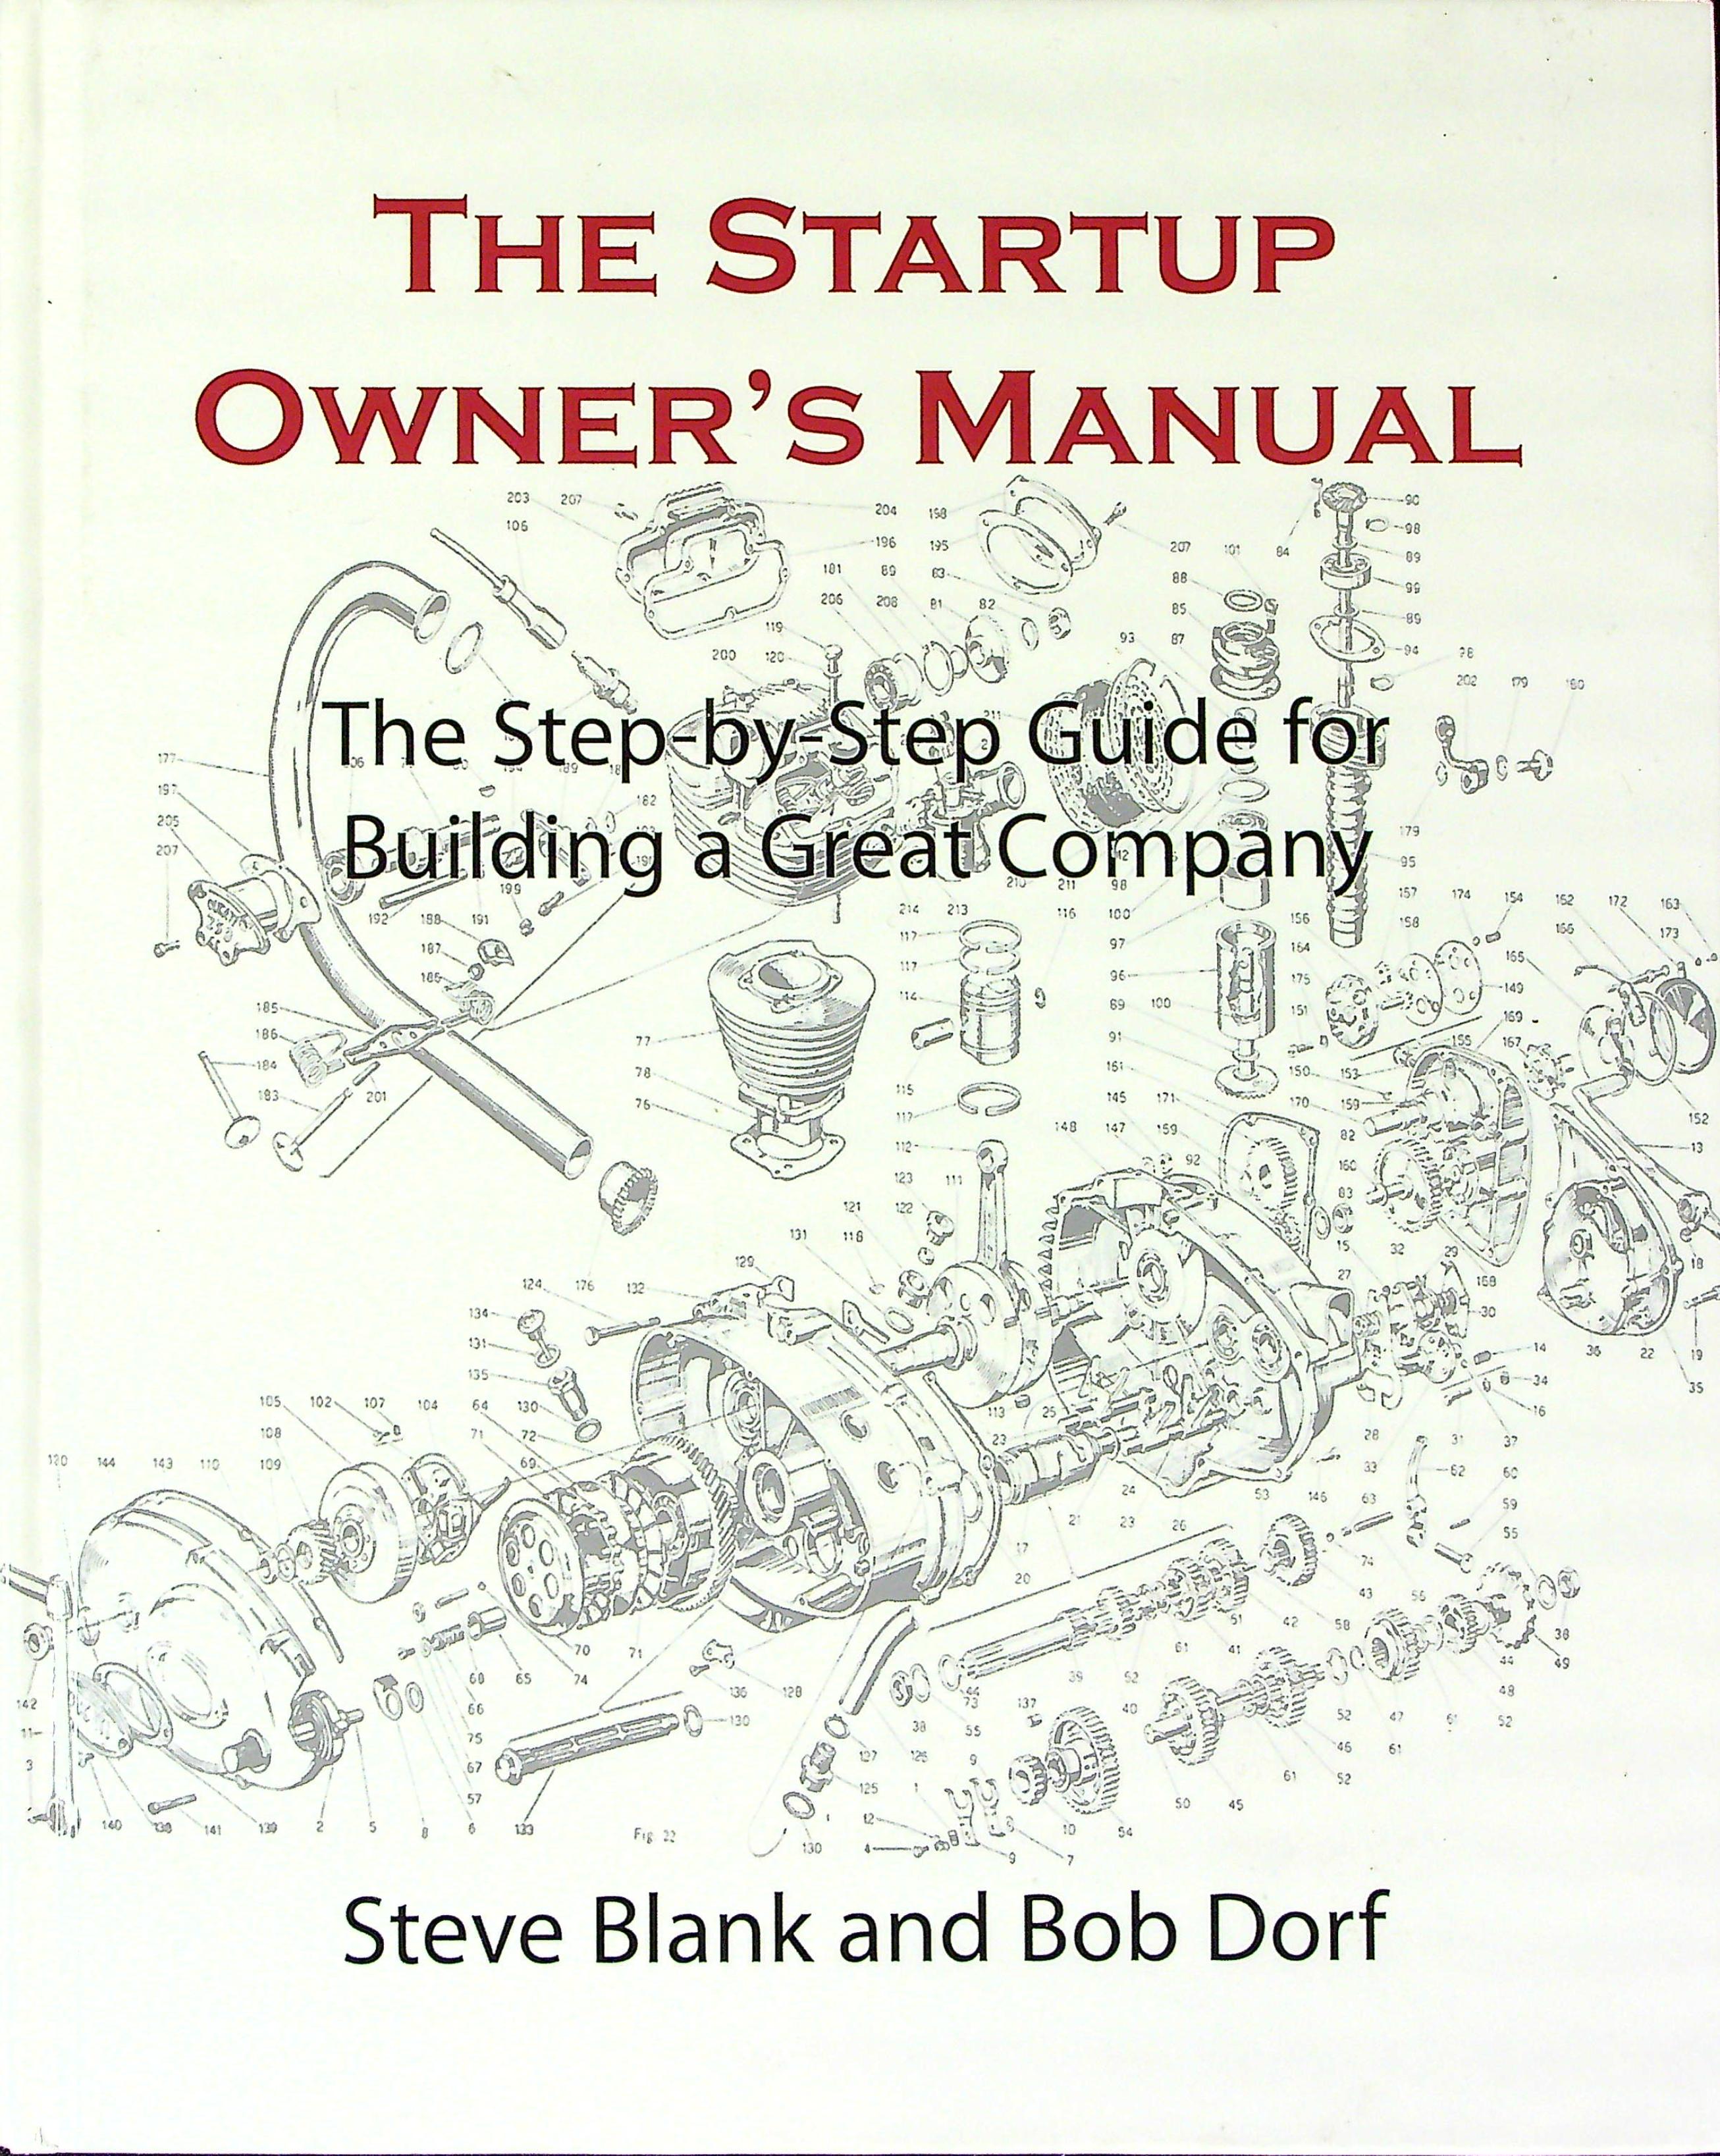 The Startup Owner's Manual: The Step-by-Step Guide for Building a Great Company - Steve Blank; Bob Dorf